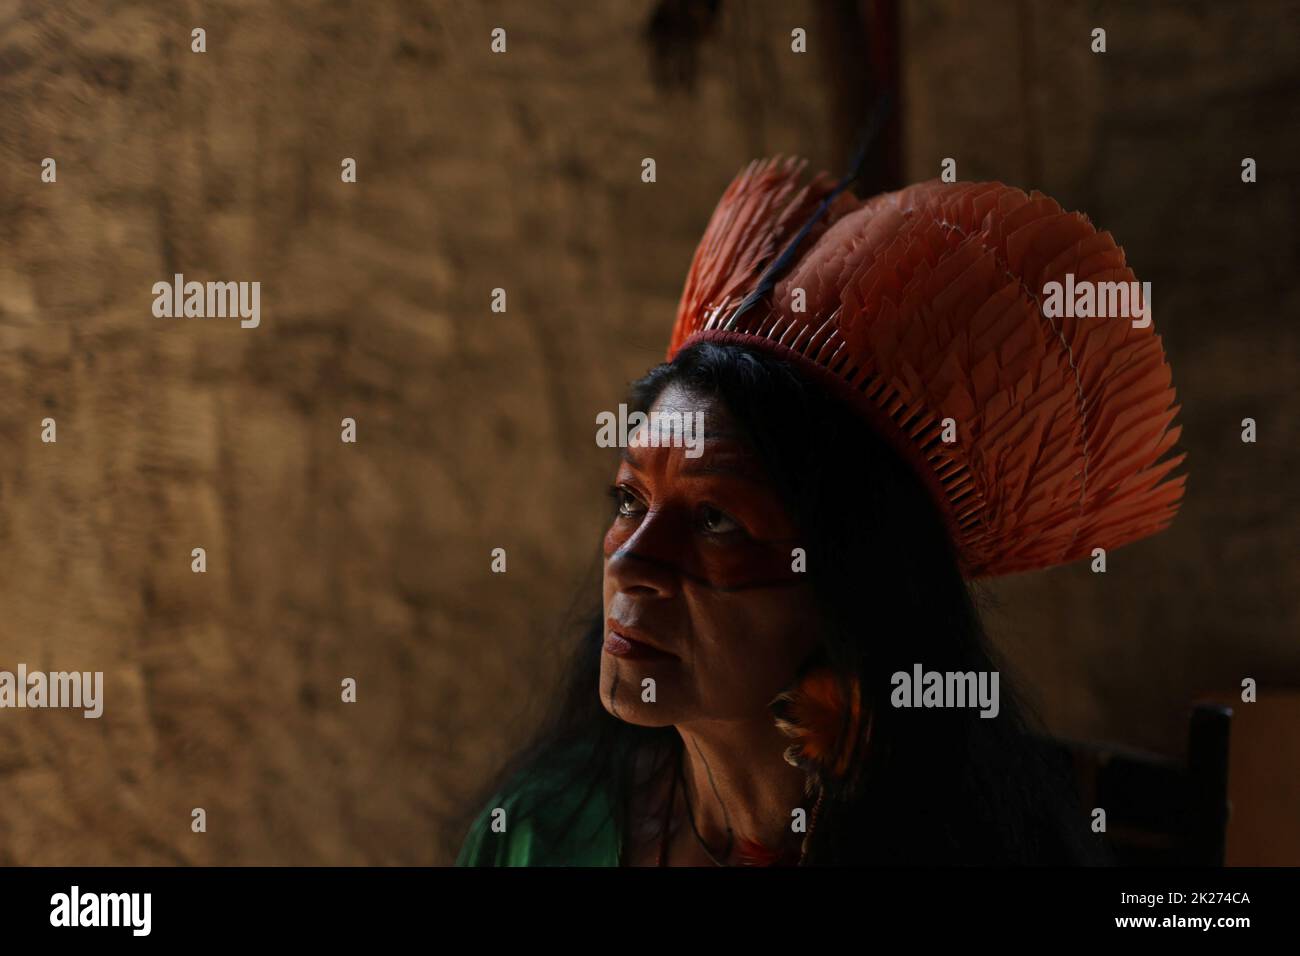 Tereza Arapium, from the Arapium indigenous people, candidate for Rio de Janeiro state deputy for the Rede Sustentabilidade party, poses for a photo at the Aldeia Maracana in Rio de Janeiro, Brazil September 22, 2022. REUTERS/Pilar Olivares Stock Photo